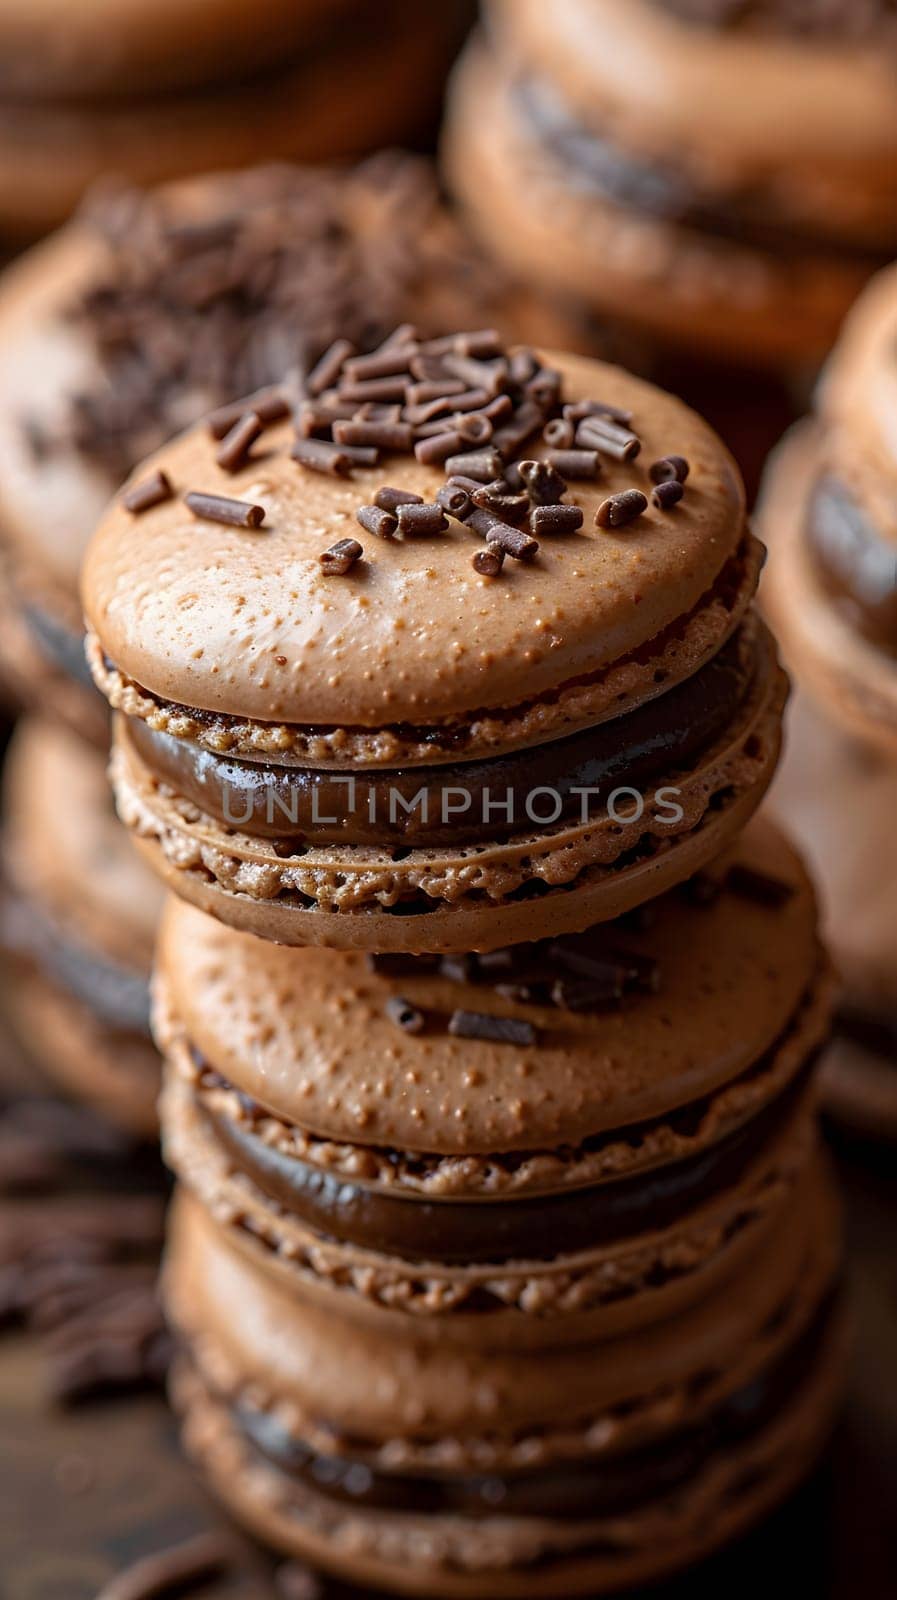 A delicious dessert made of a stack of chocolate macarons sprinkled with chocolate on top. Perfect finger food for any sweet craving. Ingredients chocolate, sugar, almond, egg white